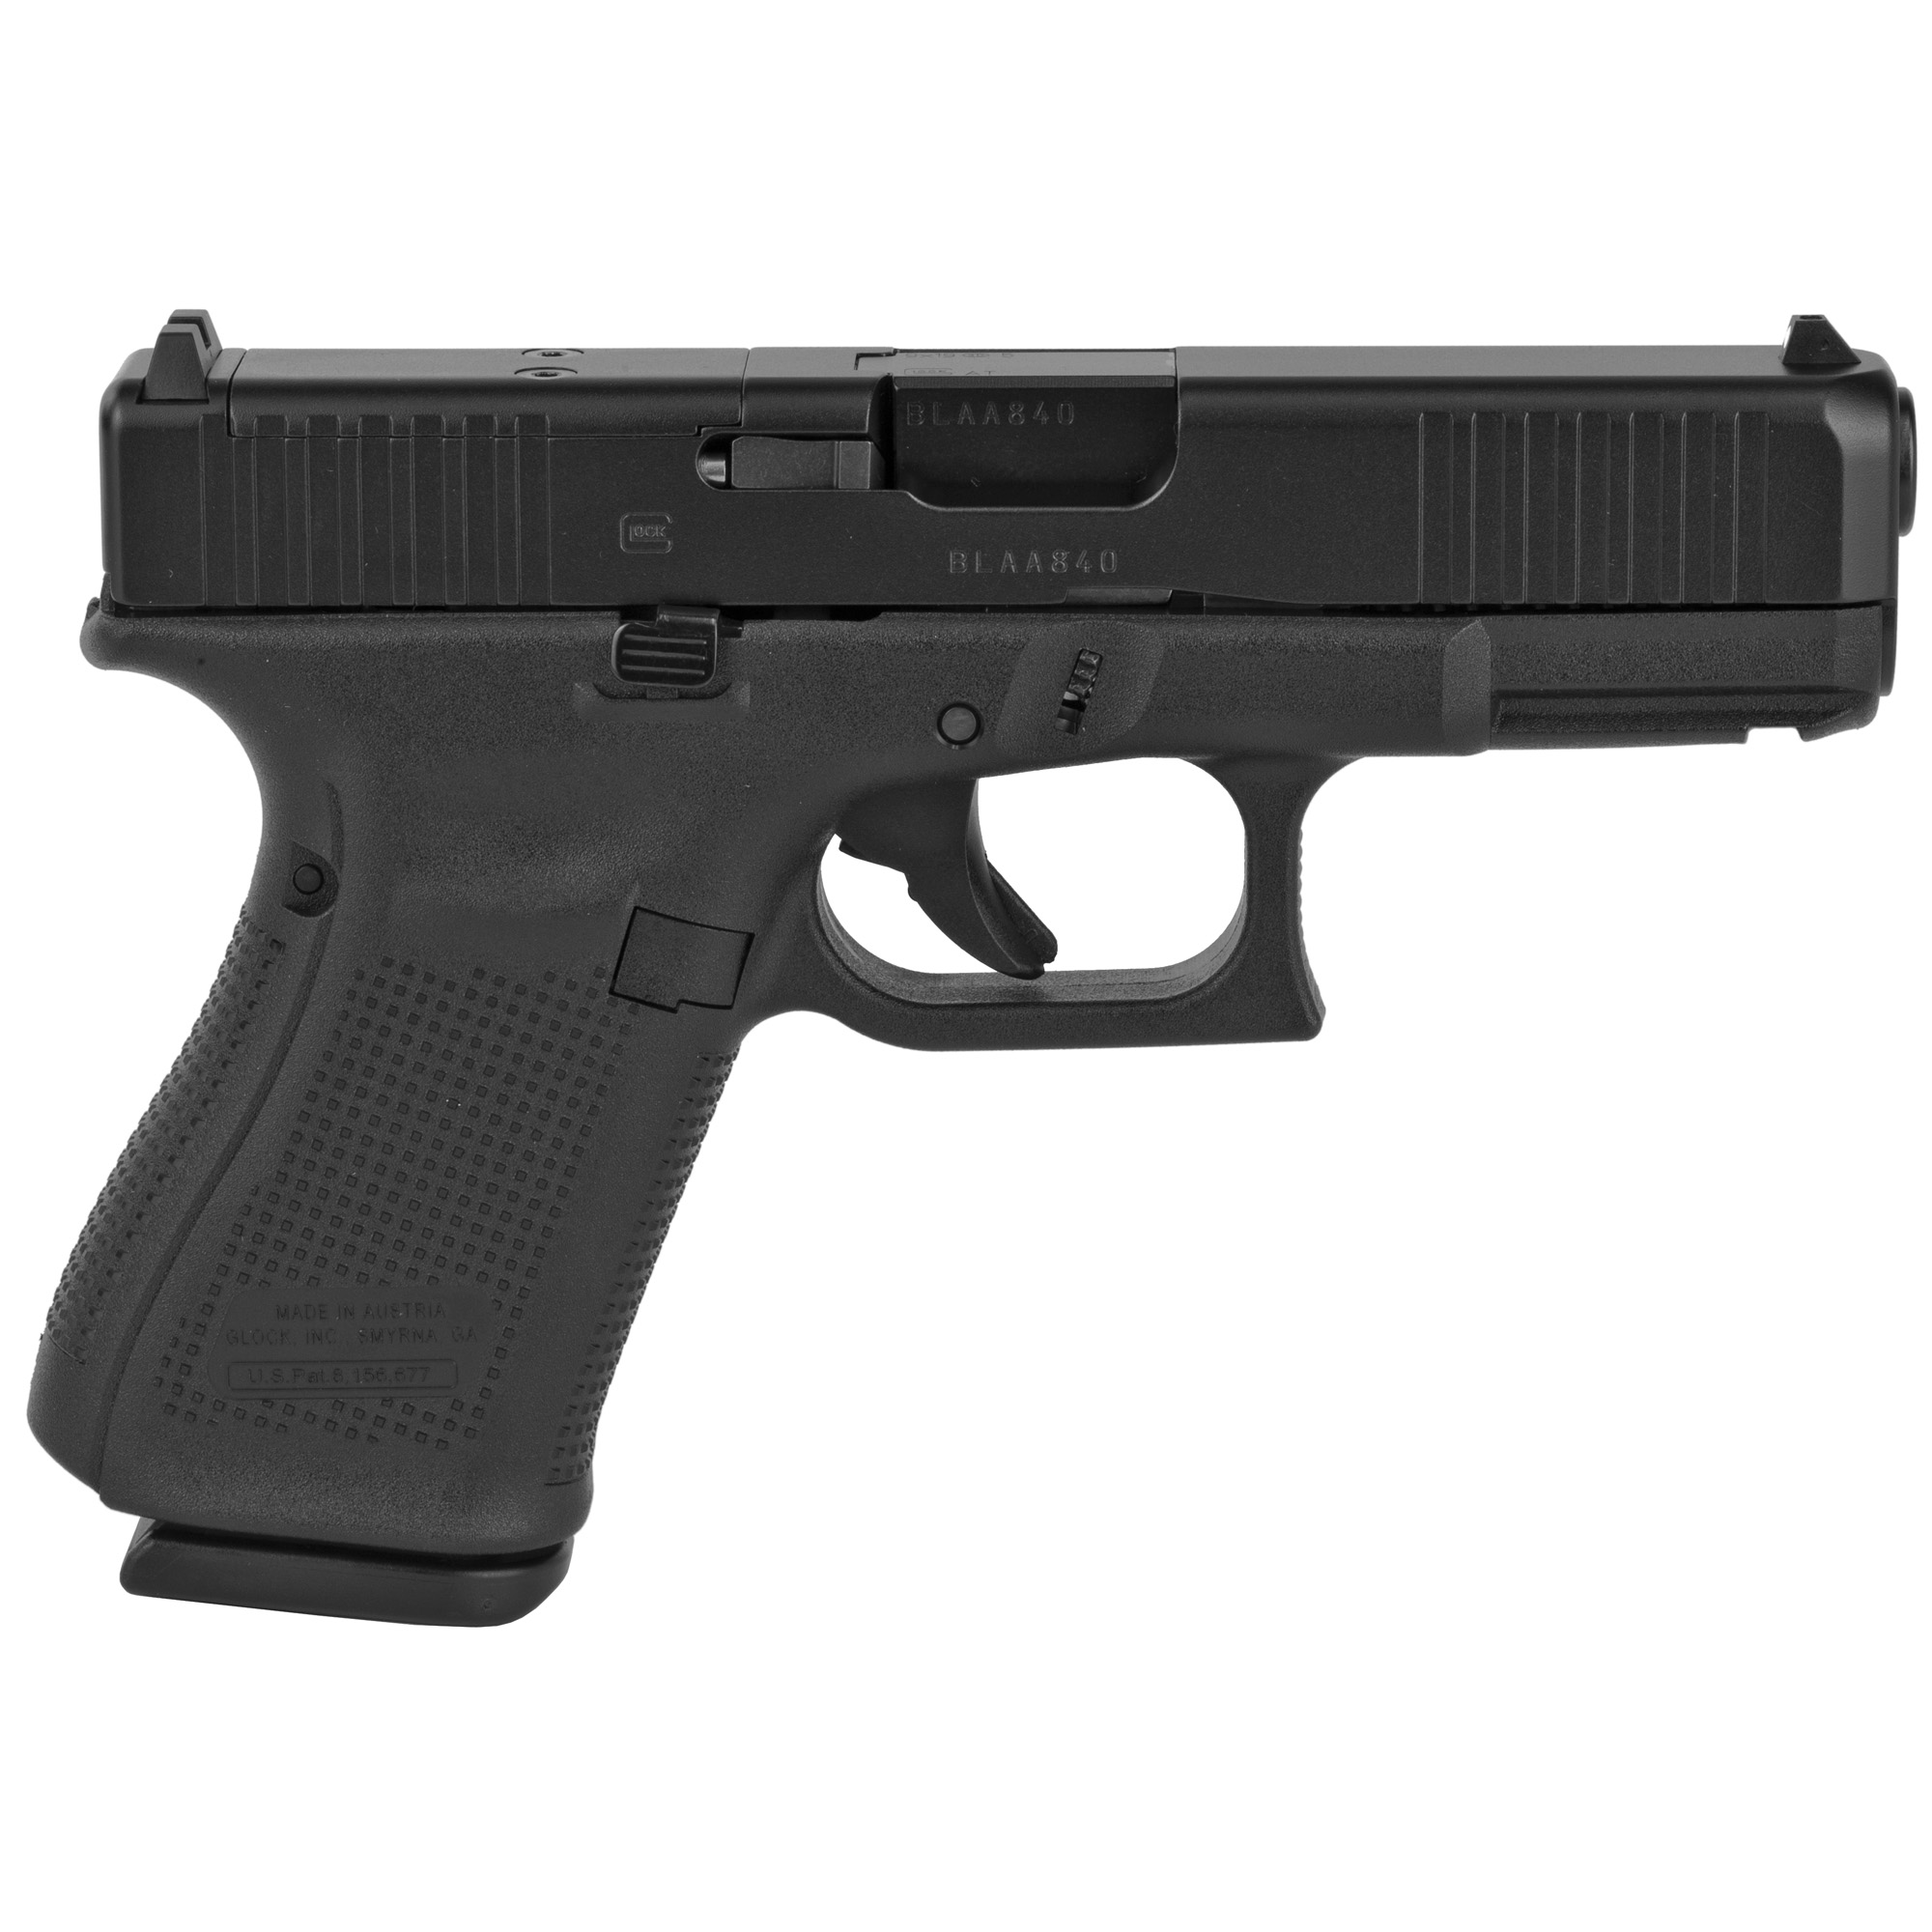 Glock, 19 Gen5 M.O.S., Striker Fired, Compact Size, 9MM, 4.02" Marksman Barrel, Polymer Frame, Matte Finish, Fixed Sights, 15Rd, 3 Magazines, Front Serrations, Ambidextrous Slide Stop Lever, Flared Mag Well, nDLC Finished Slide and Barrel